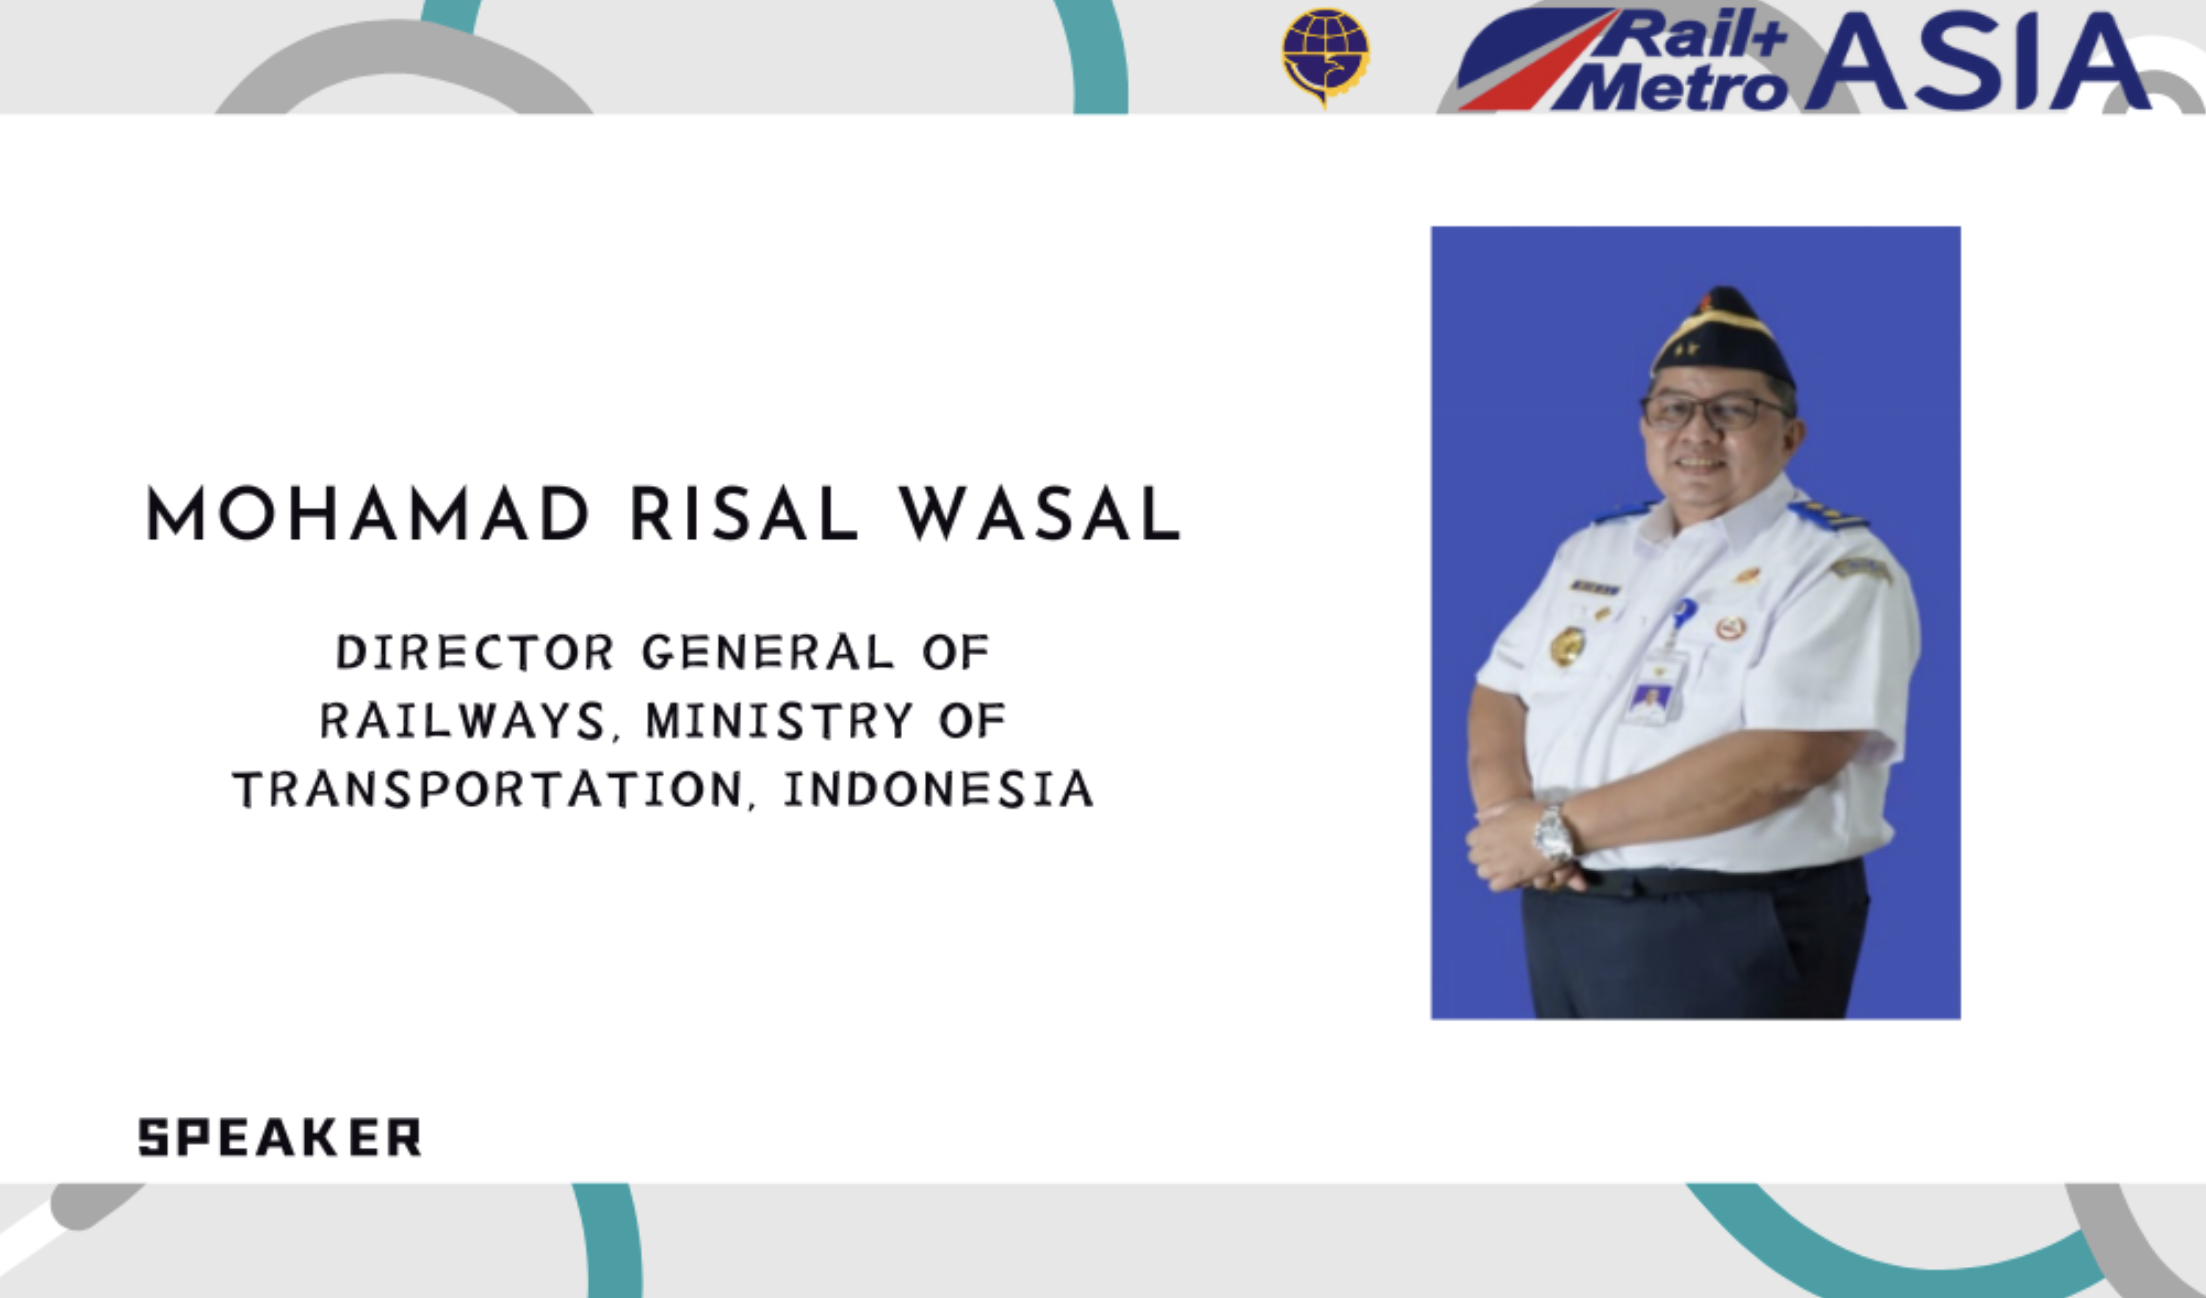 Mr. Mohamad Risal Wasal, Director General of Railways, Ministry of Transport of Indonesia